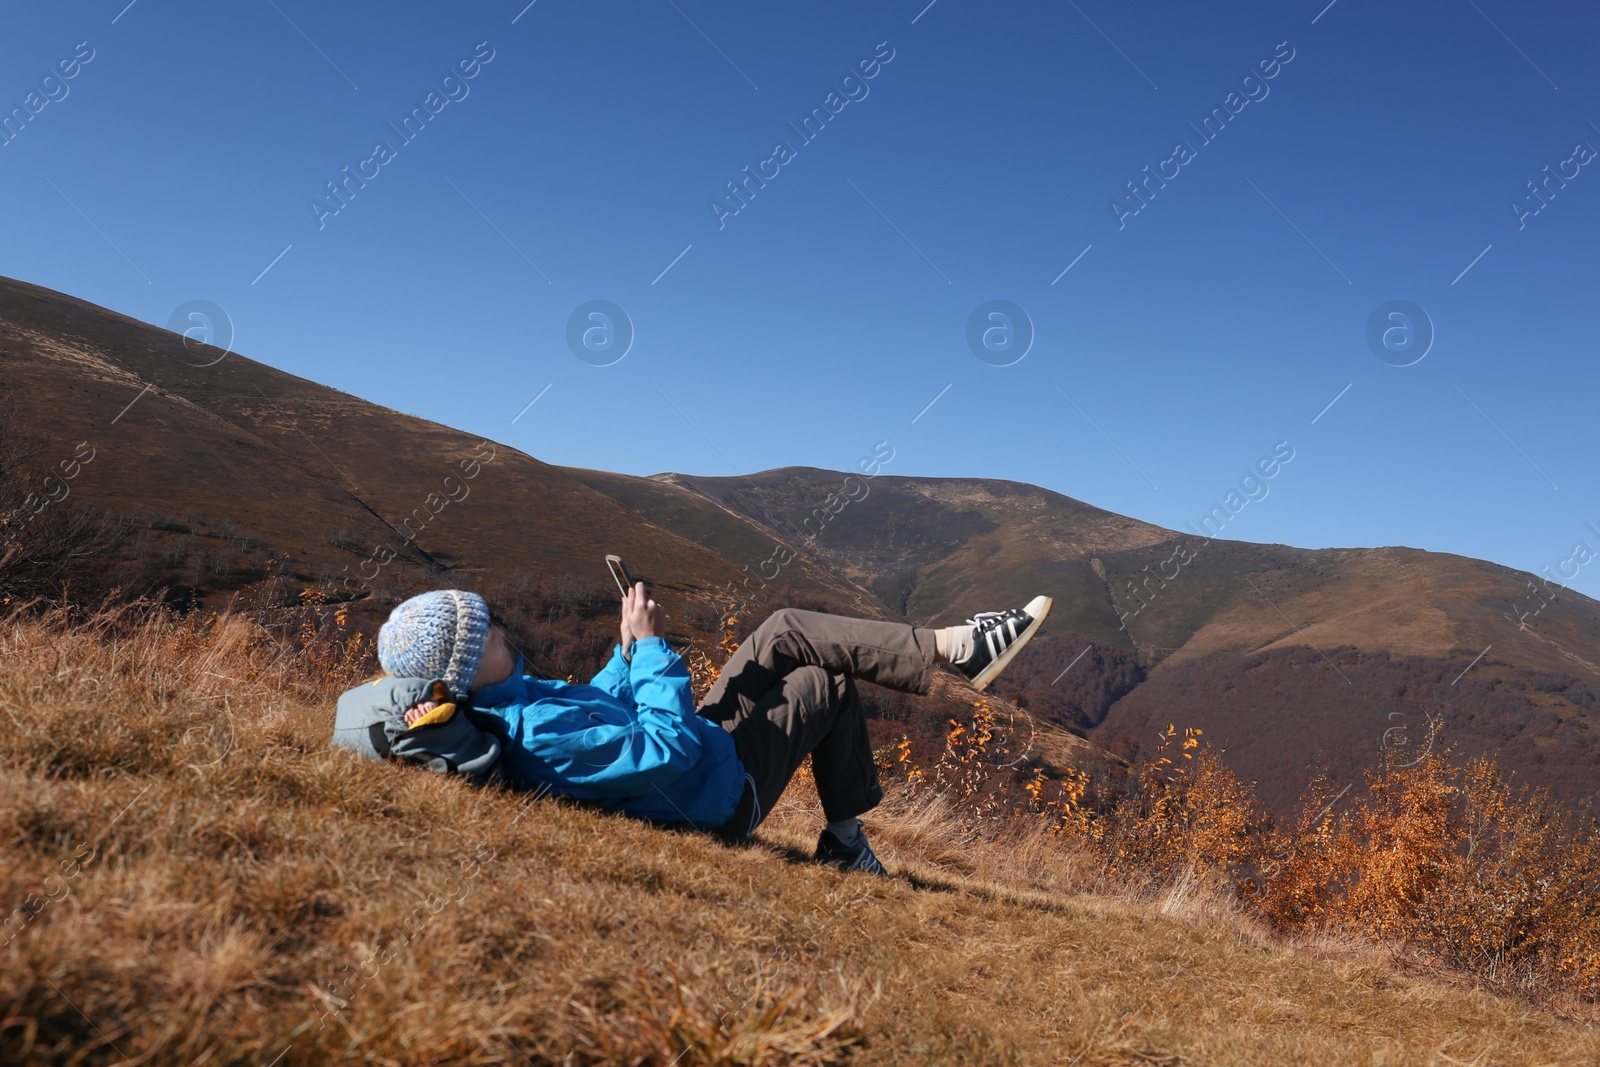 Photo of Woman in warm clothes relaxing on mountain slope